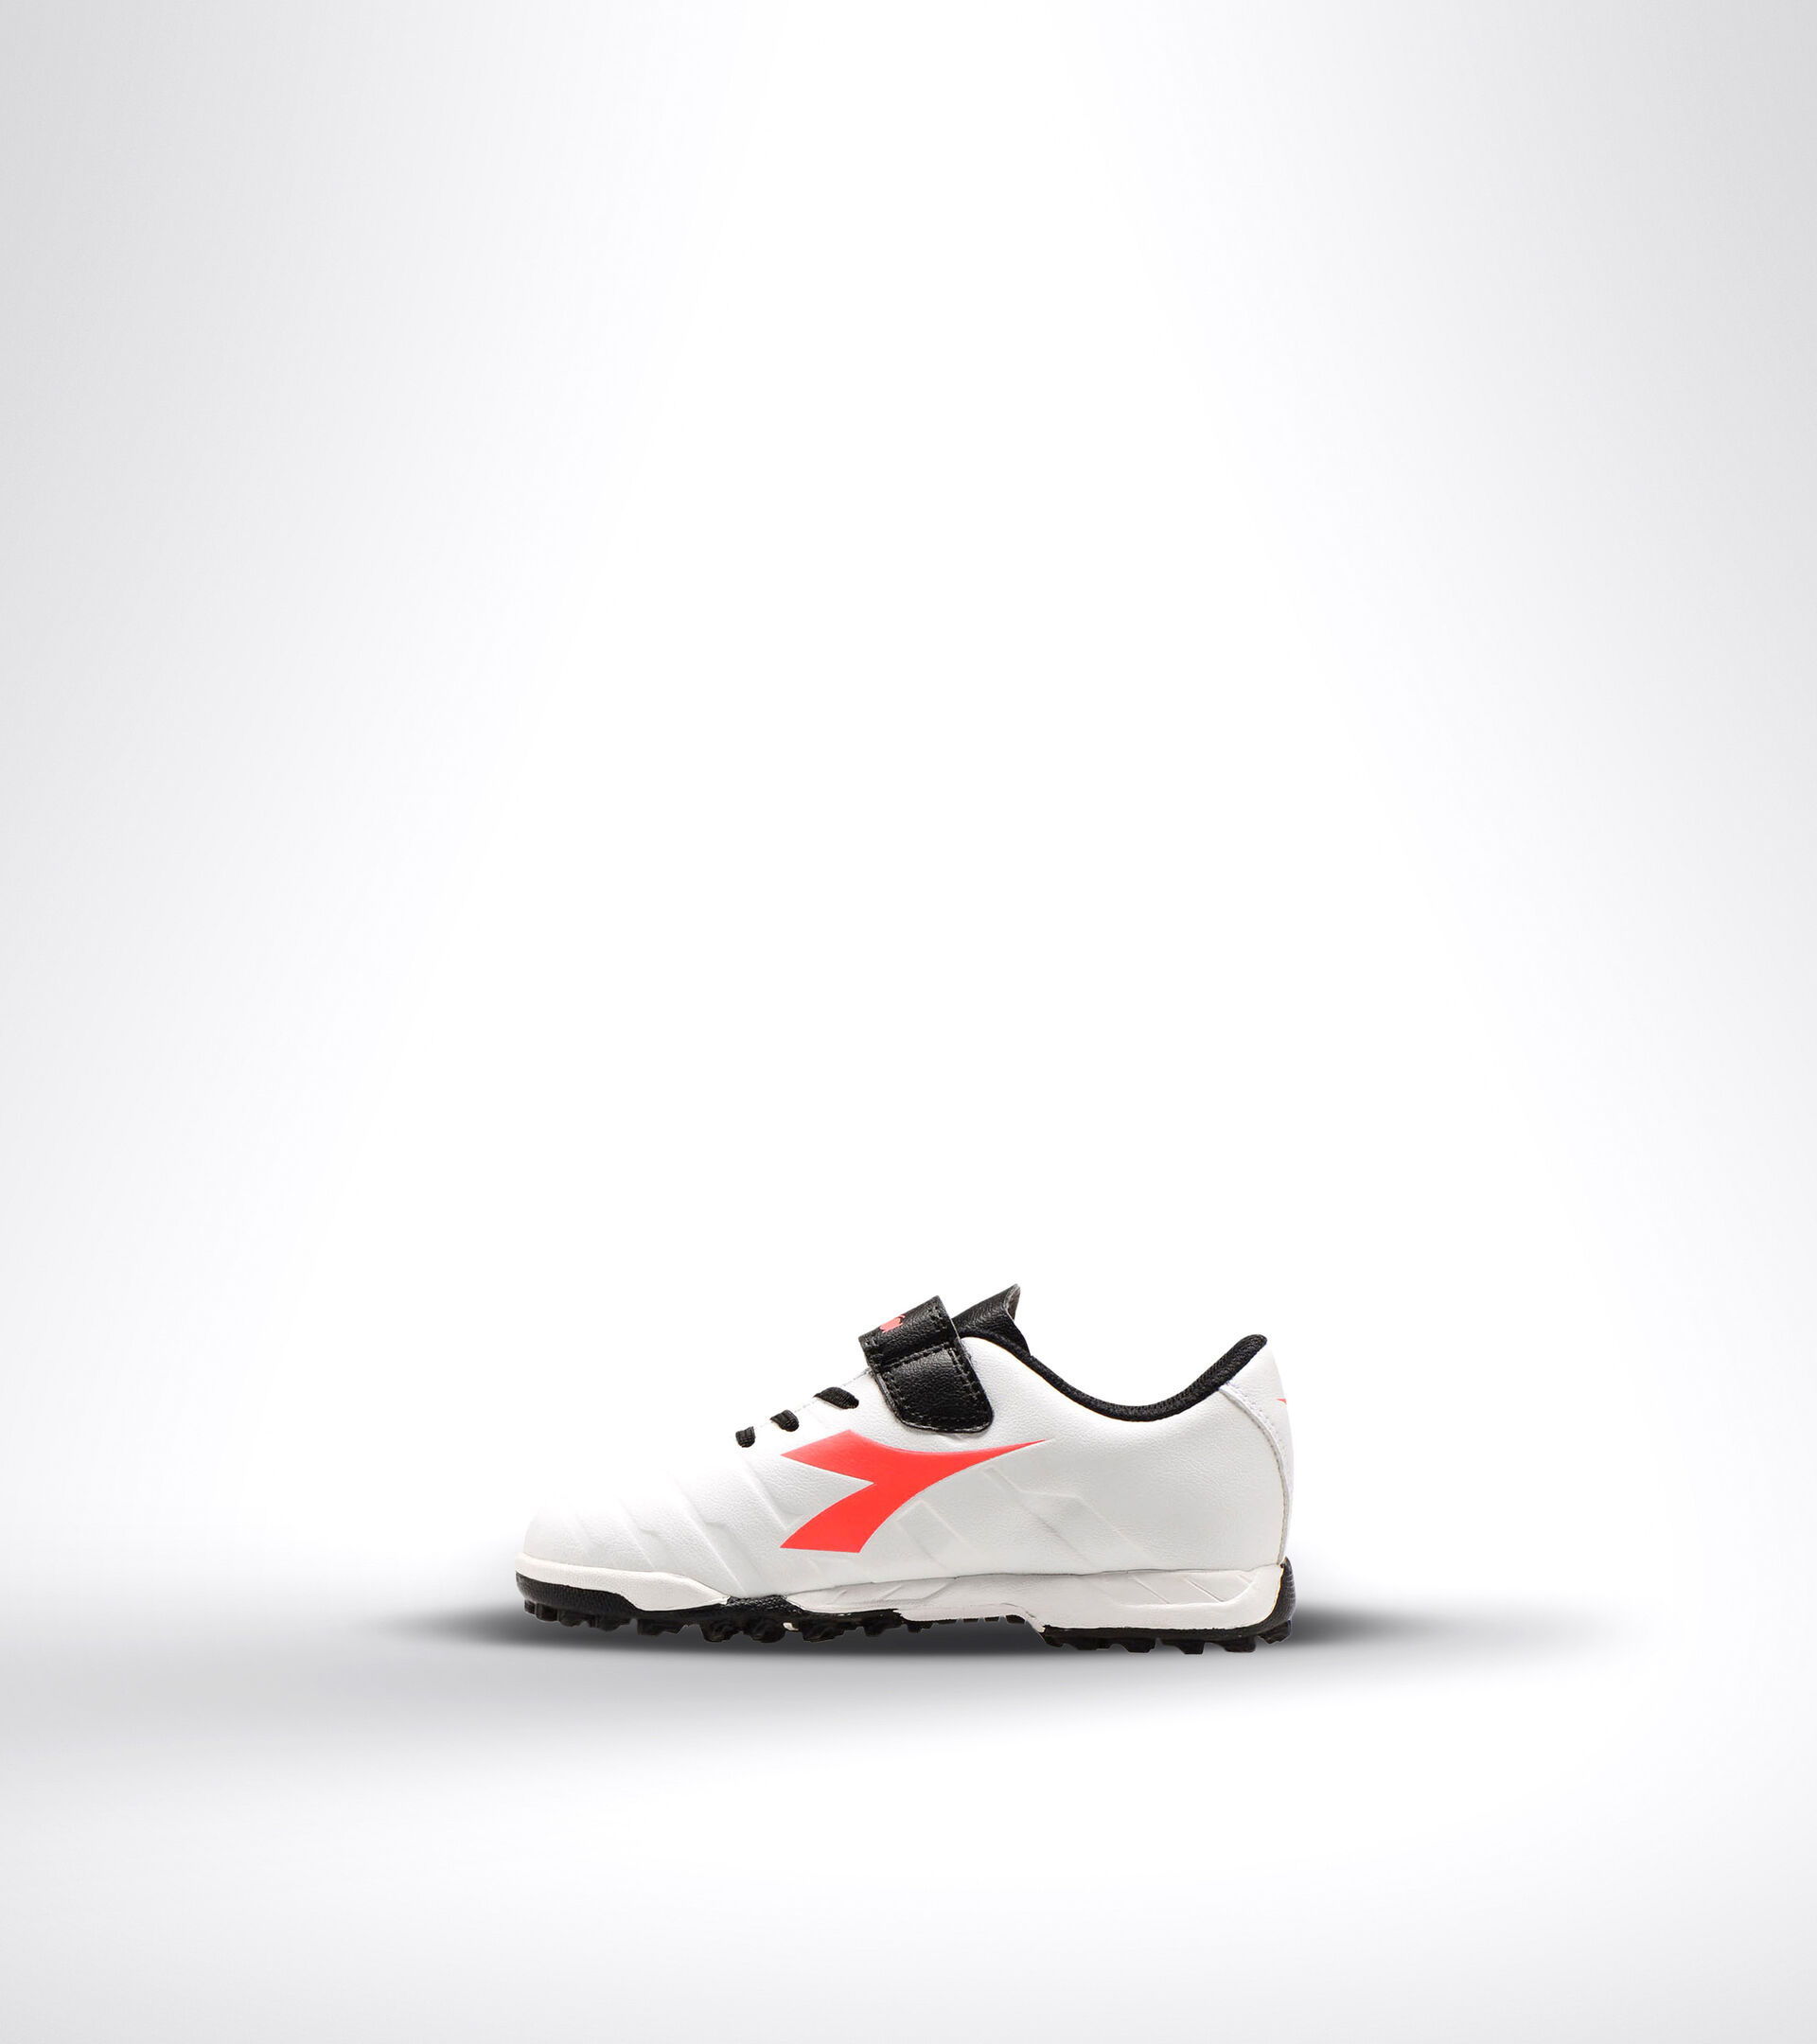 Hard ground and artificial turf football boot - Unisex kids PICHICHI 3 TF JR VE WHITE/BLACK/RED FLUO - Diadora